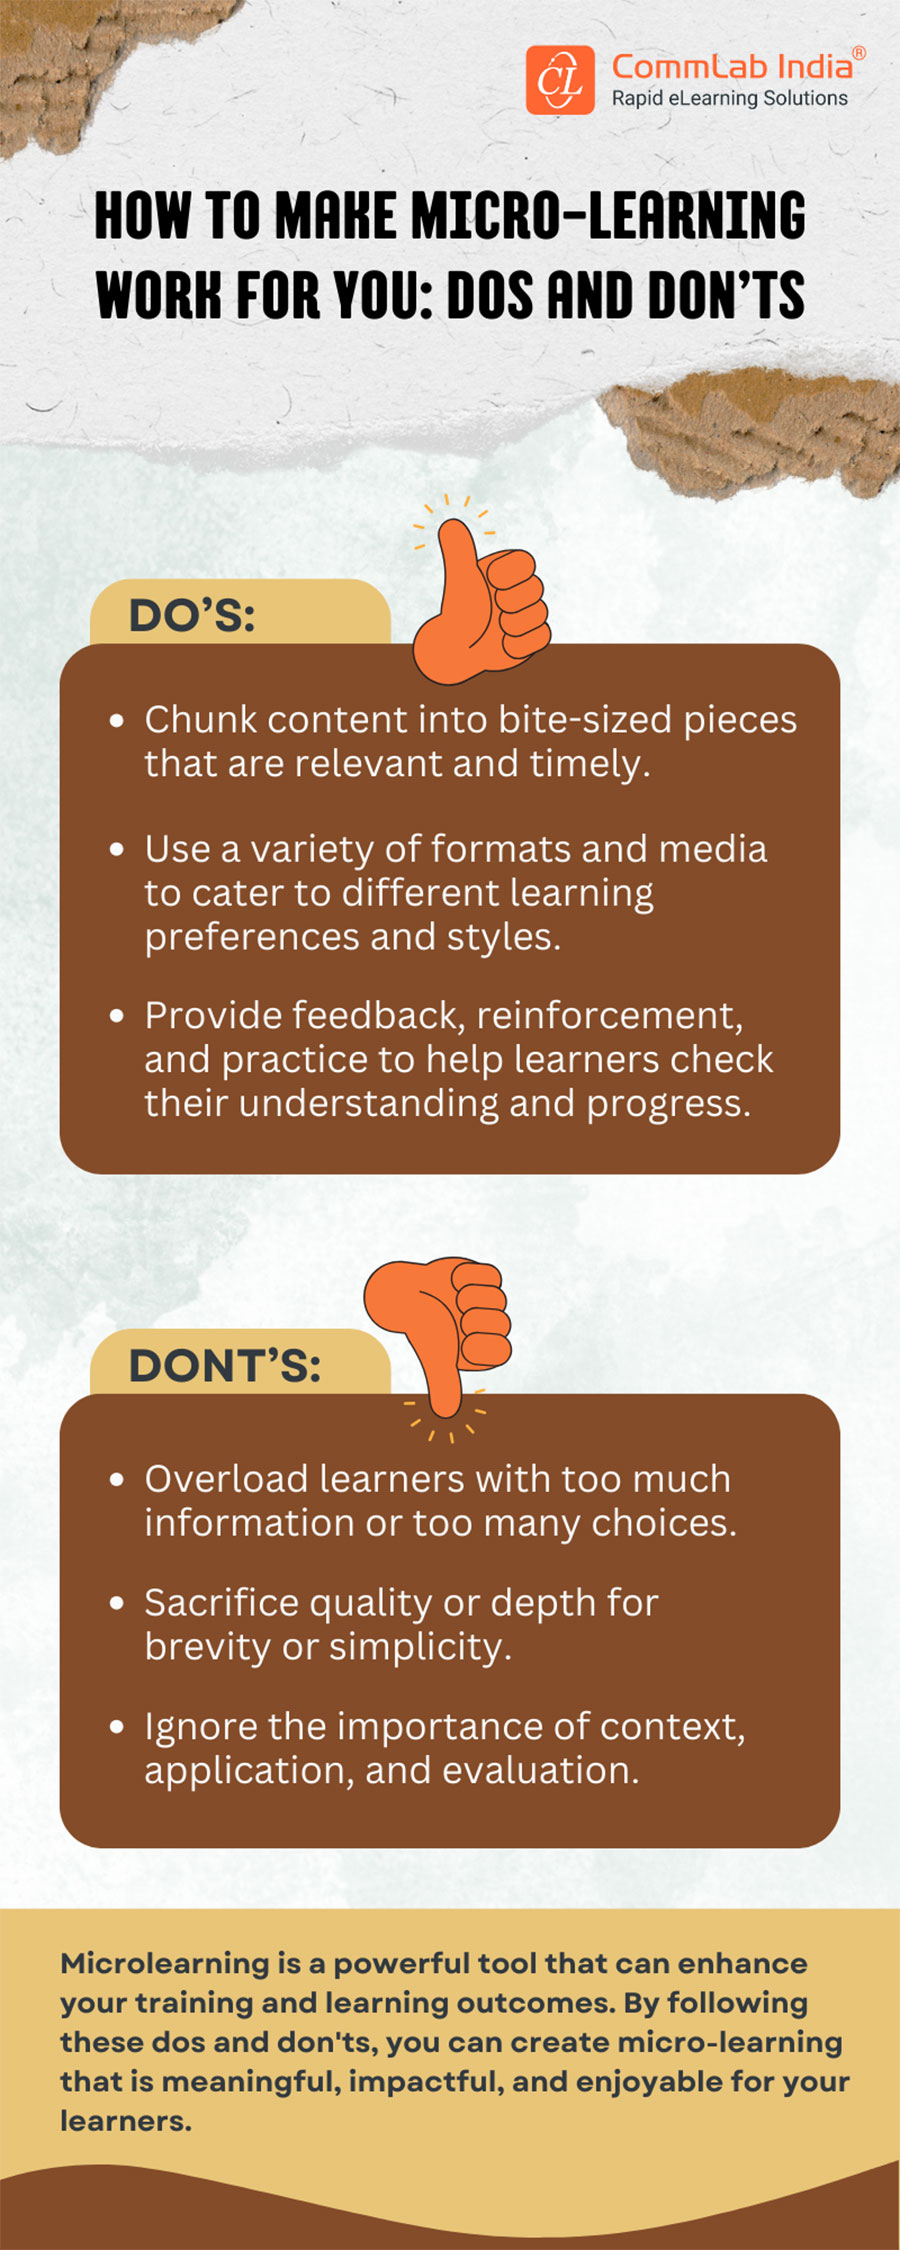 Microlearning- Dos and Don'ts